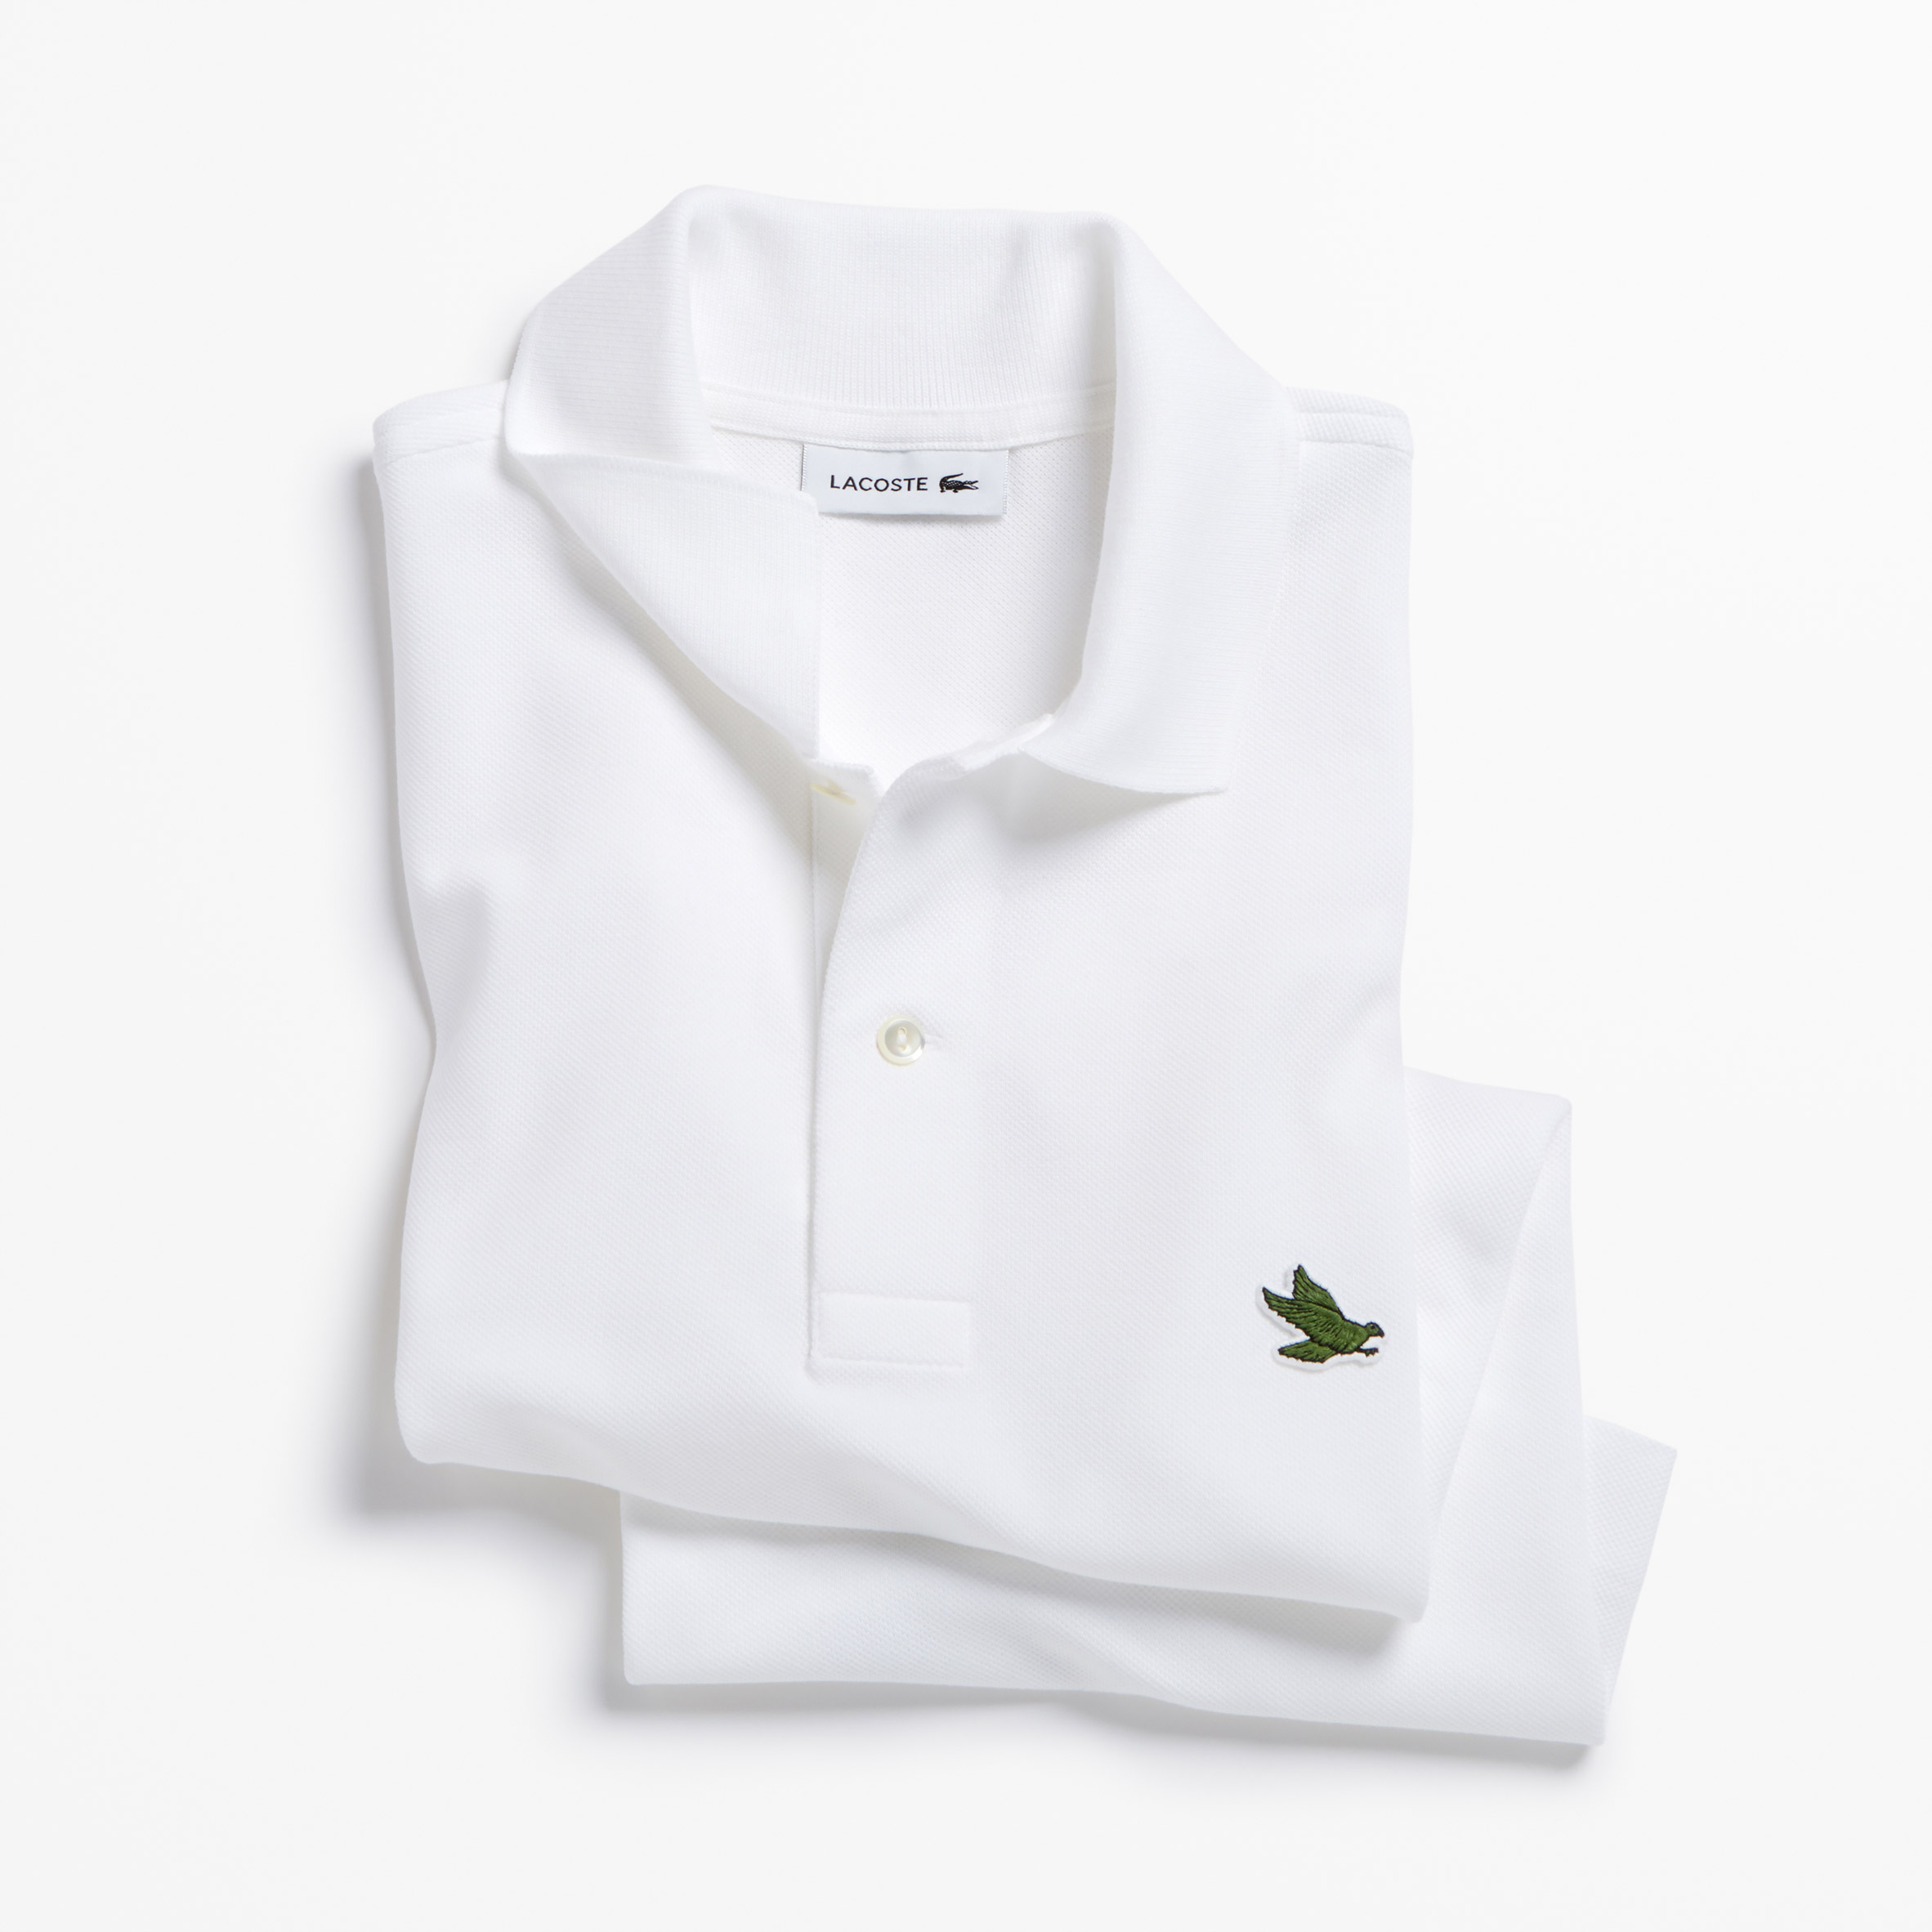 Lacoste crocodile logo replaced by endangered